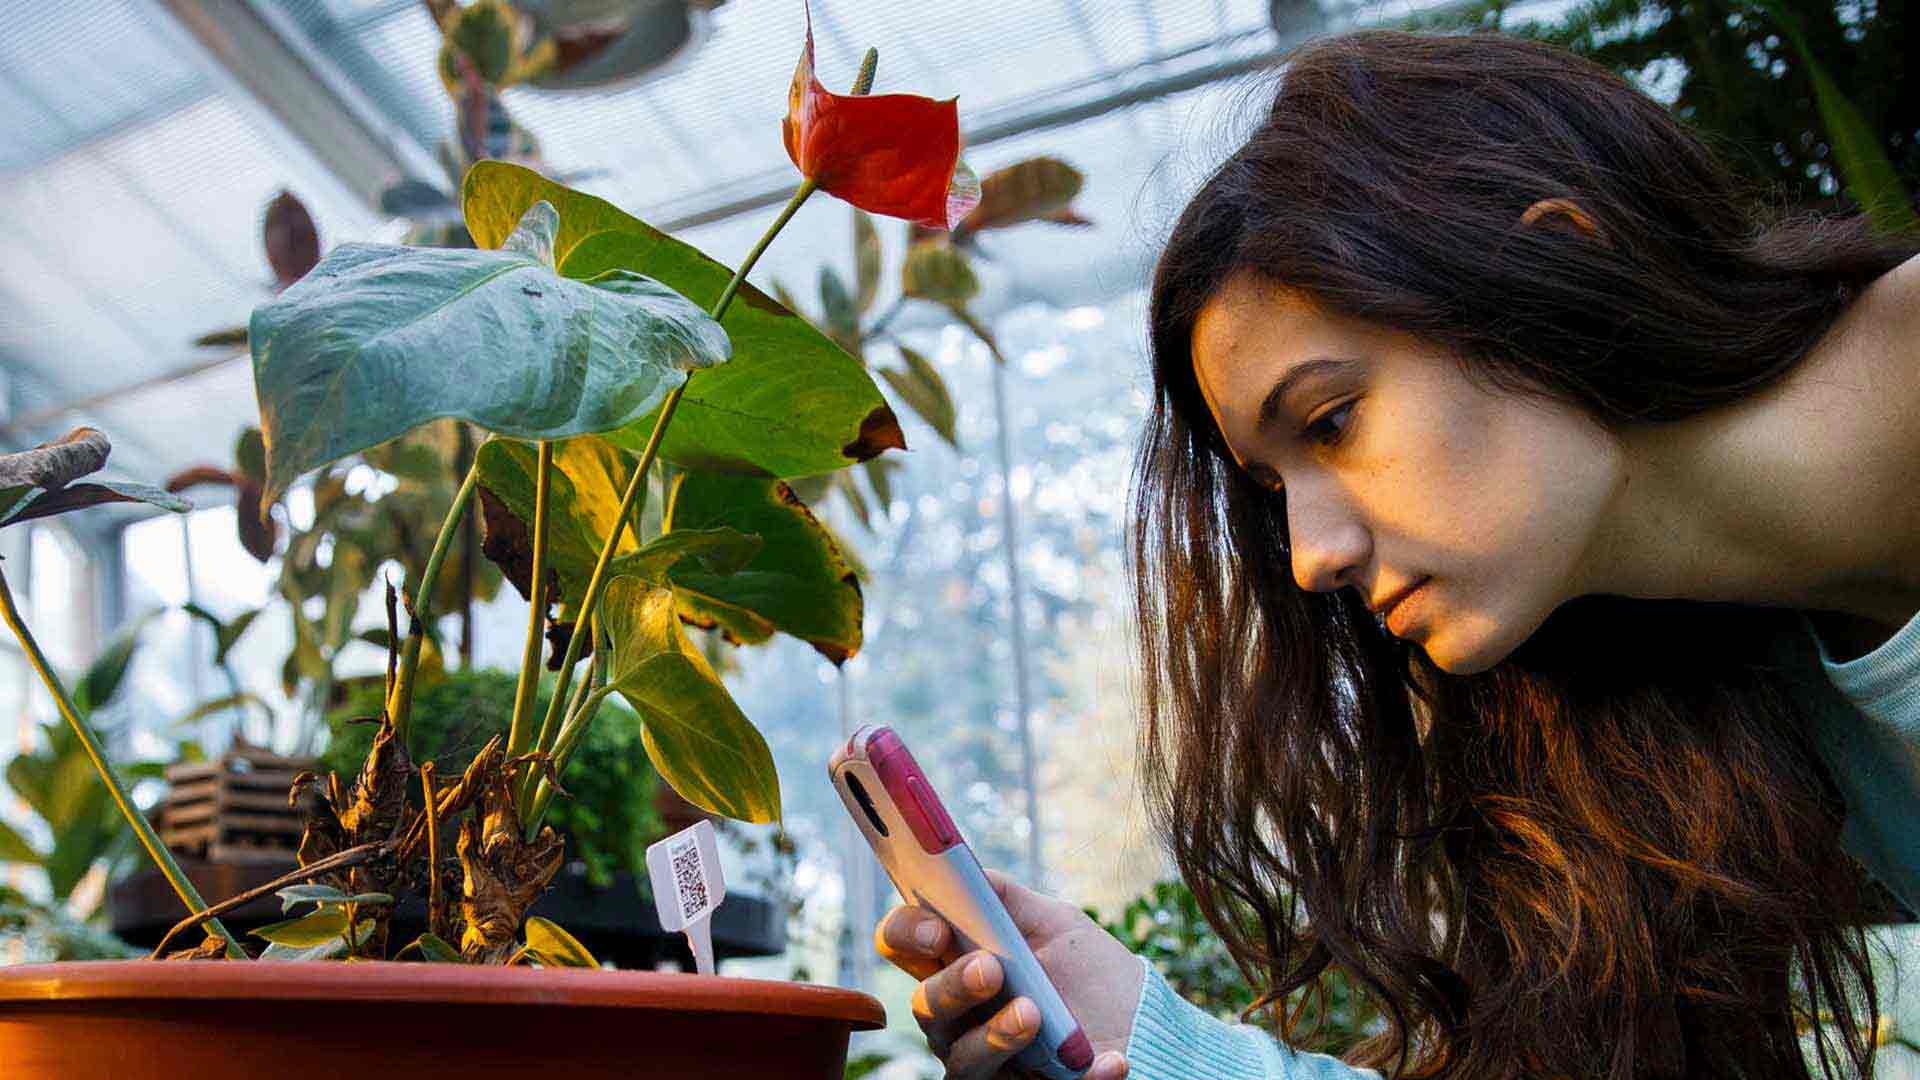 Biology student takes a photo of a QR code label on a plant in a greenhouse.